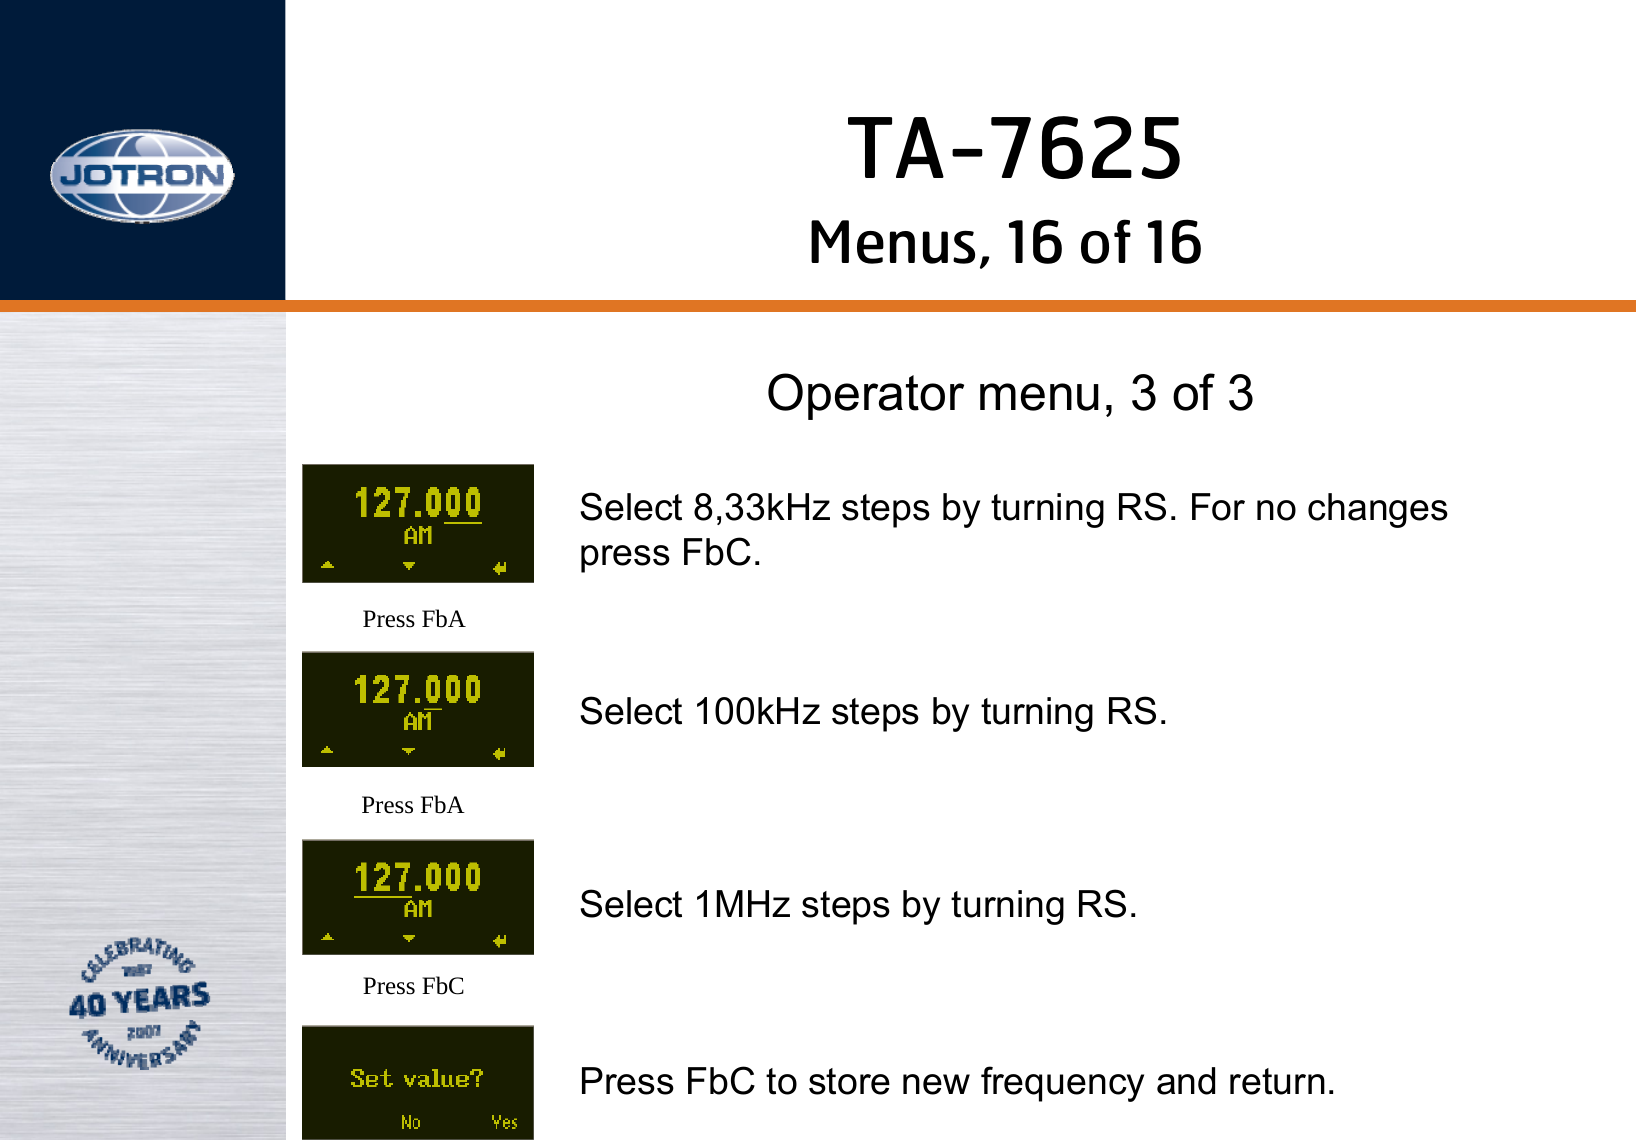 Menus, 16 of 16Operator menu, 3 of 3Press FbAPress FbAPress FbCSelect 8,33kHz steps by turning RS. For no changespress FbC.Select 100kHz steps by turning RS.Select 1MHz steps by turning RS.Press FbC to store new frequency and return.TA-7625